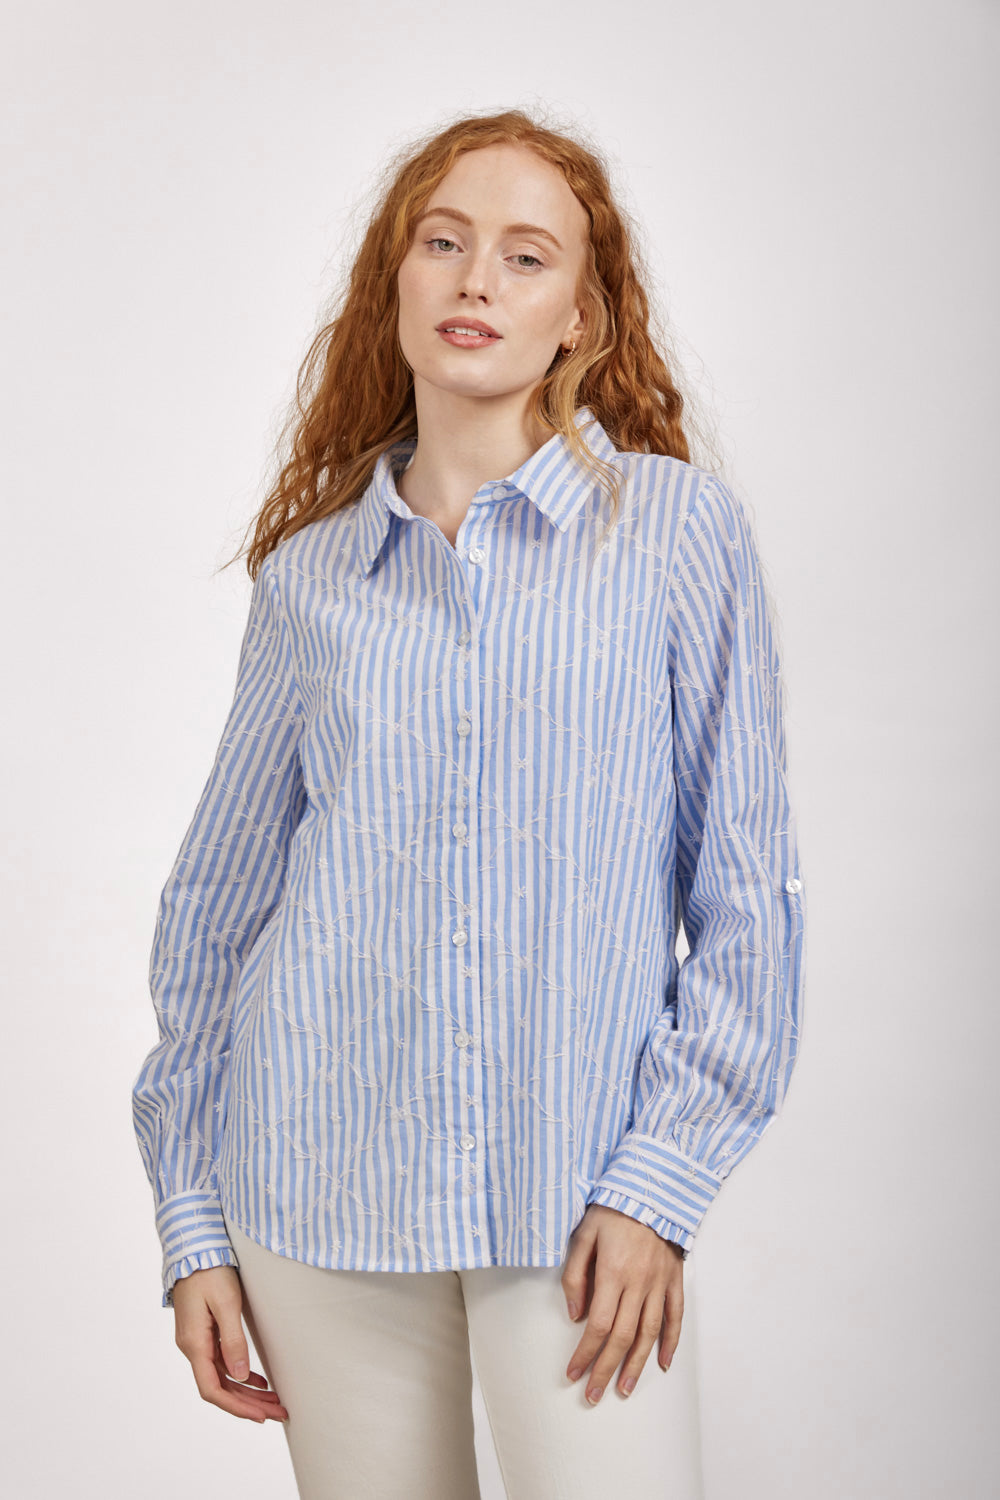 Embroidered Pinstripe Shirt